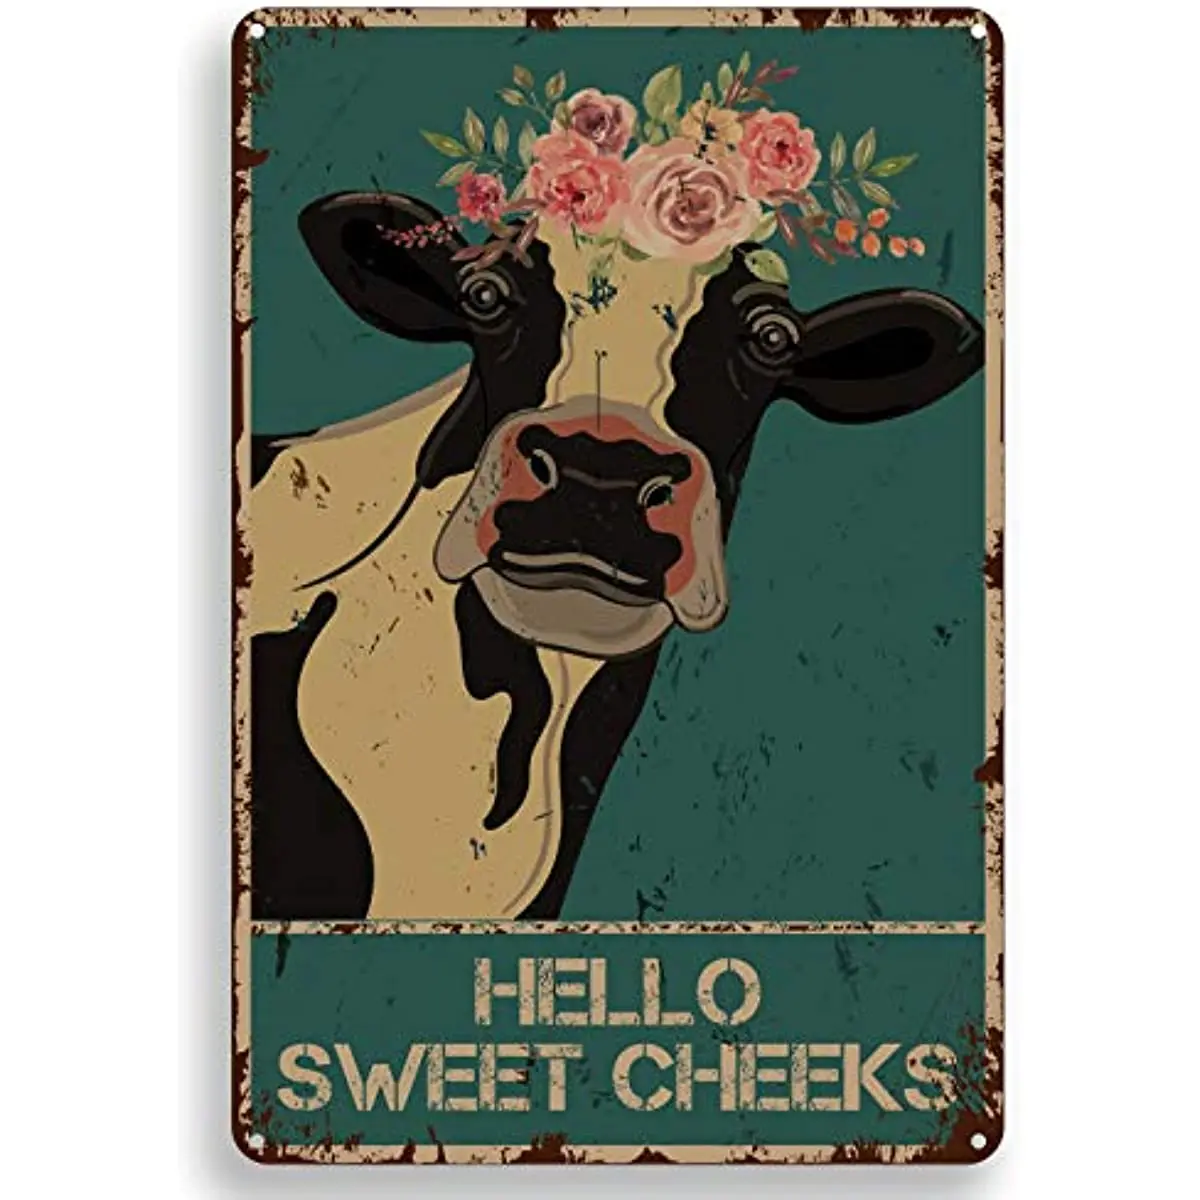 

Funny Bathroom Quote Metal Tin Sign Wall Decor - Vintage Hello Sweet Cheeks Cow Tin Sign for Office/Home/Classroom Decor Gifts